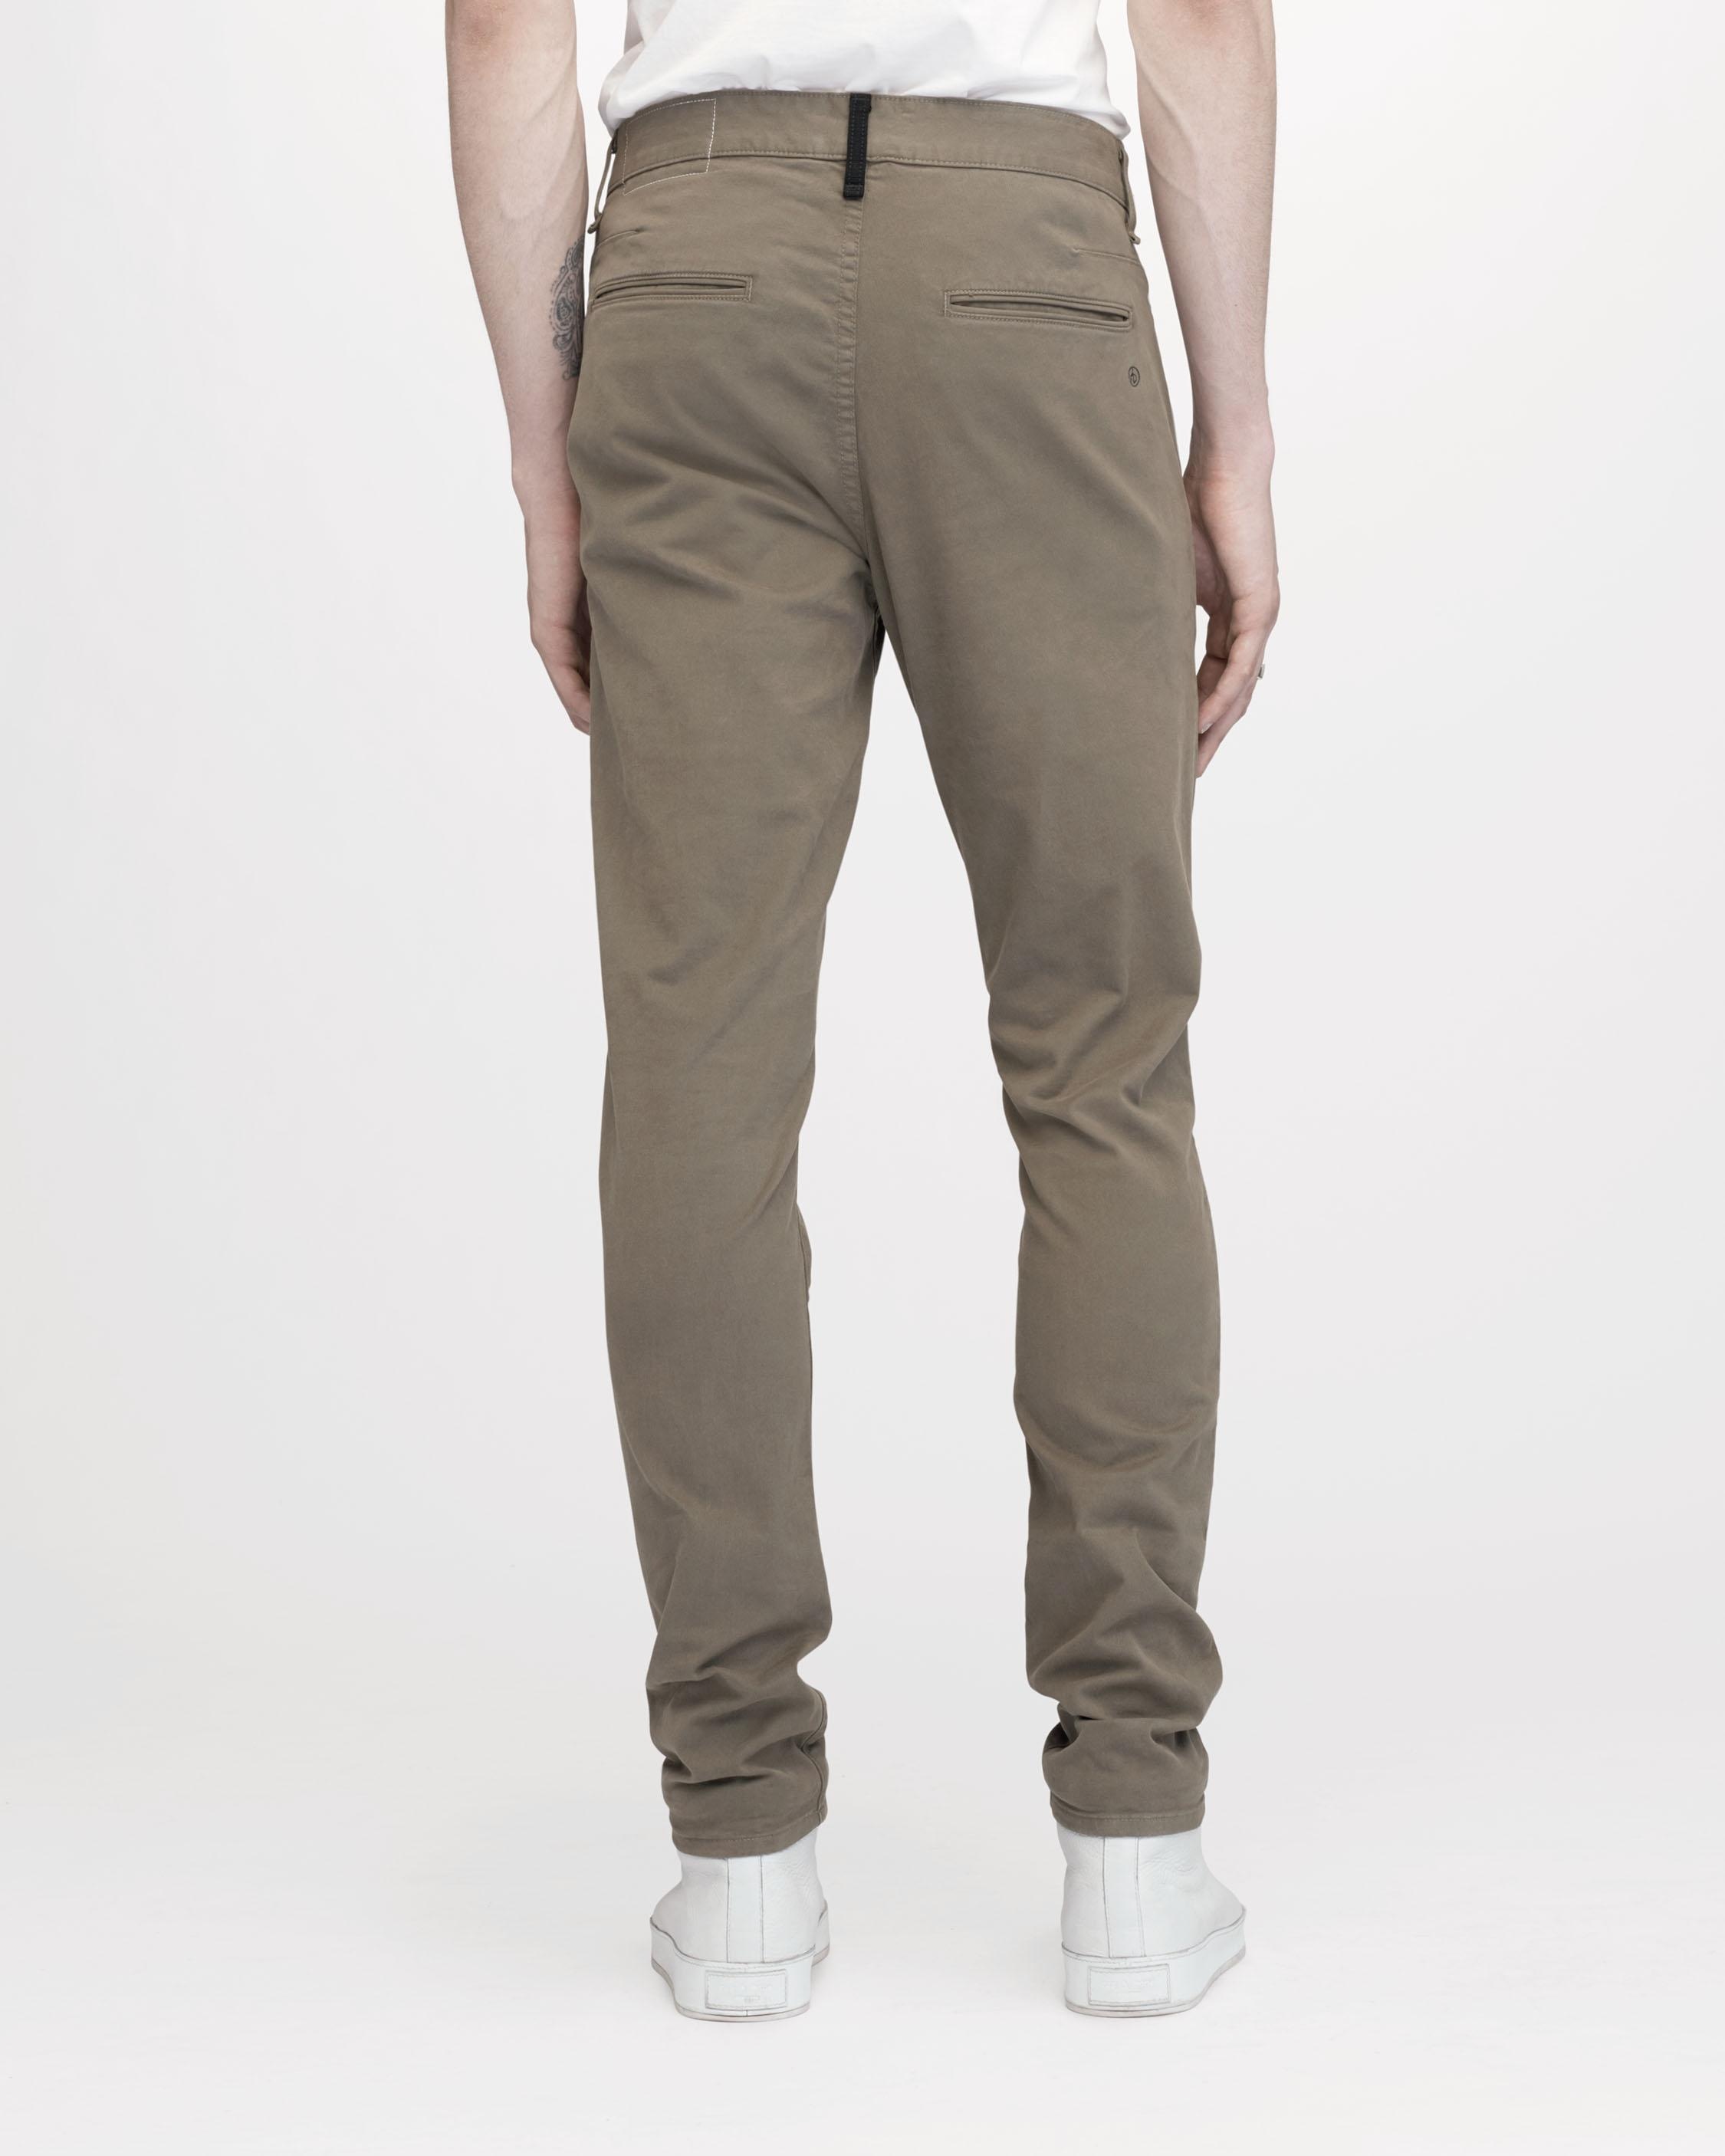 Fit 1 Low-Rise Chino
Extra Slim Fit Pant - 2